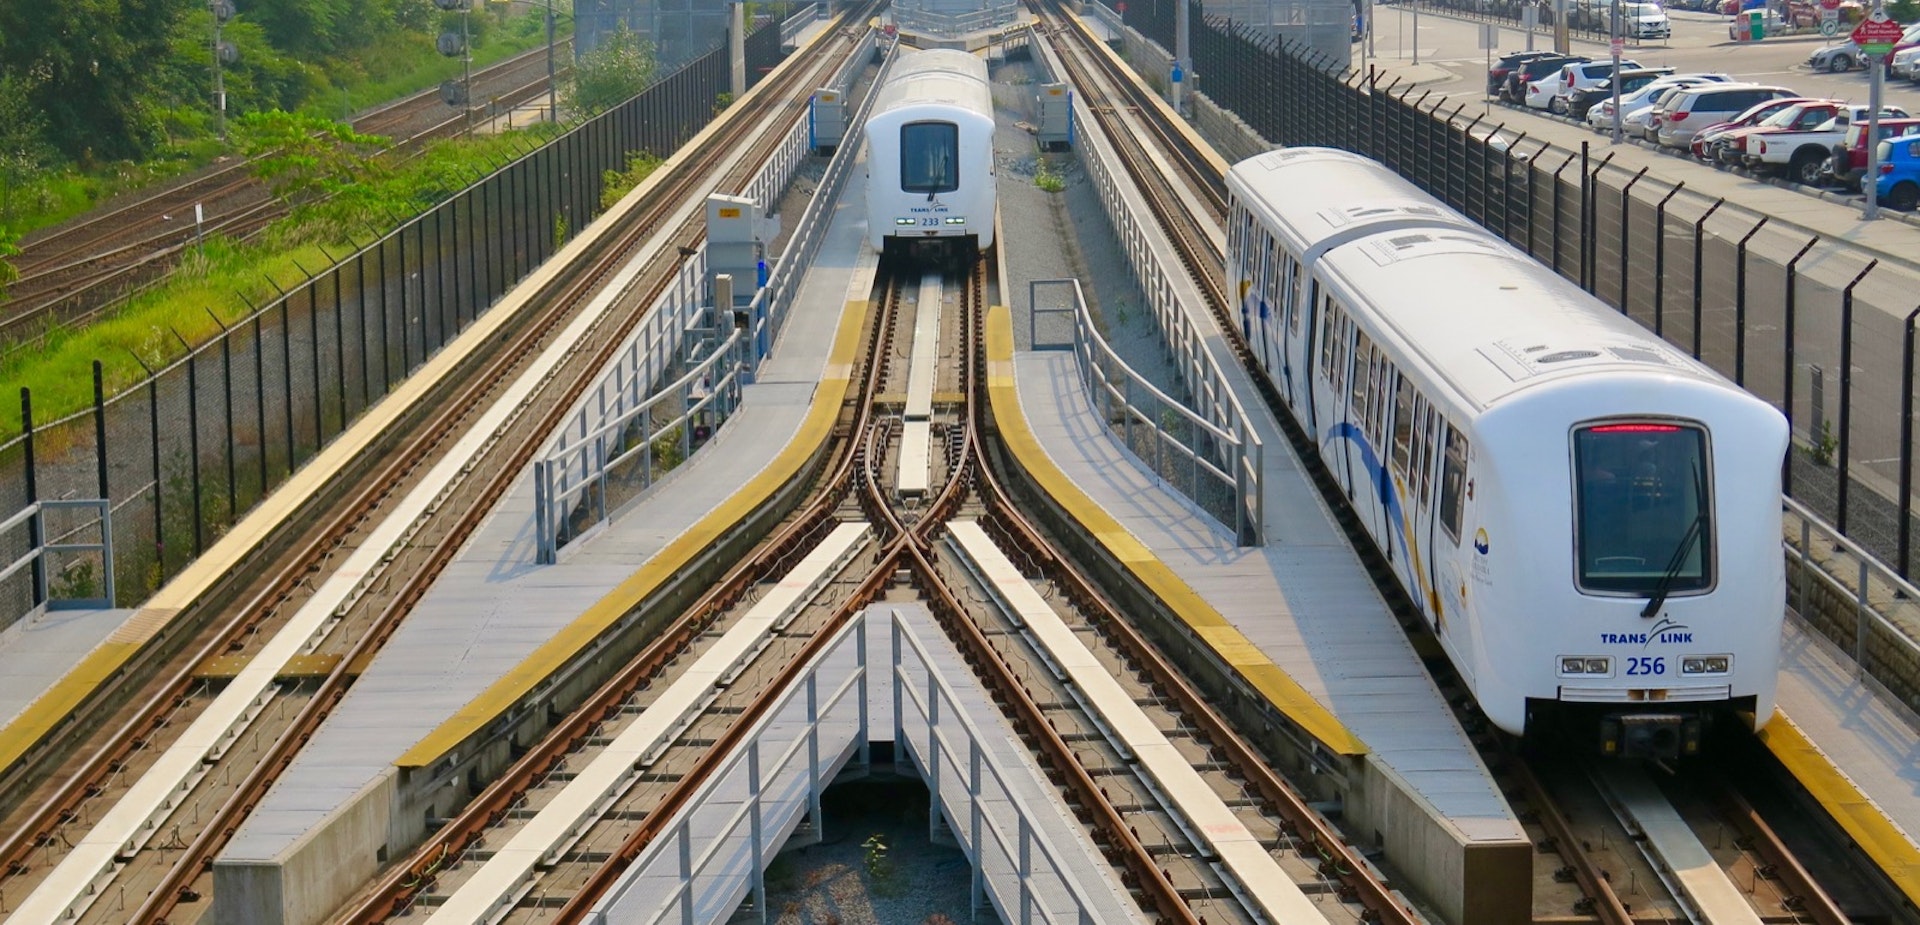 Two SkyTrain trains are on different tracks as they come out of a station